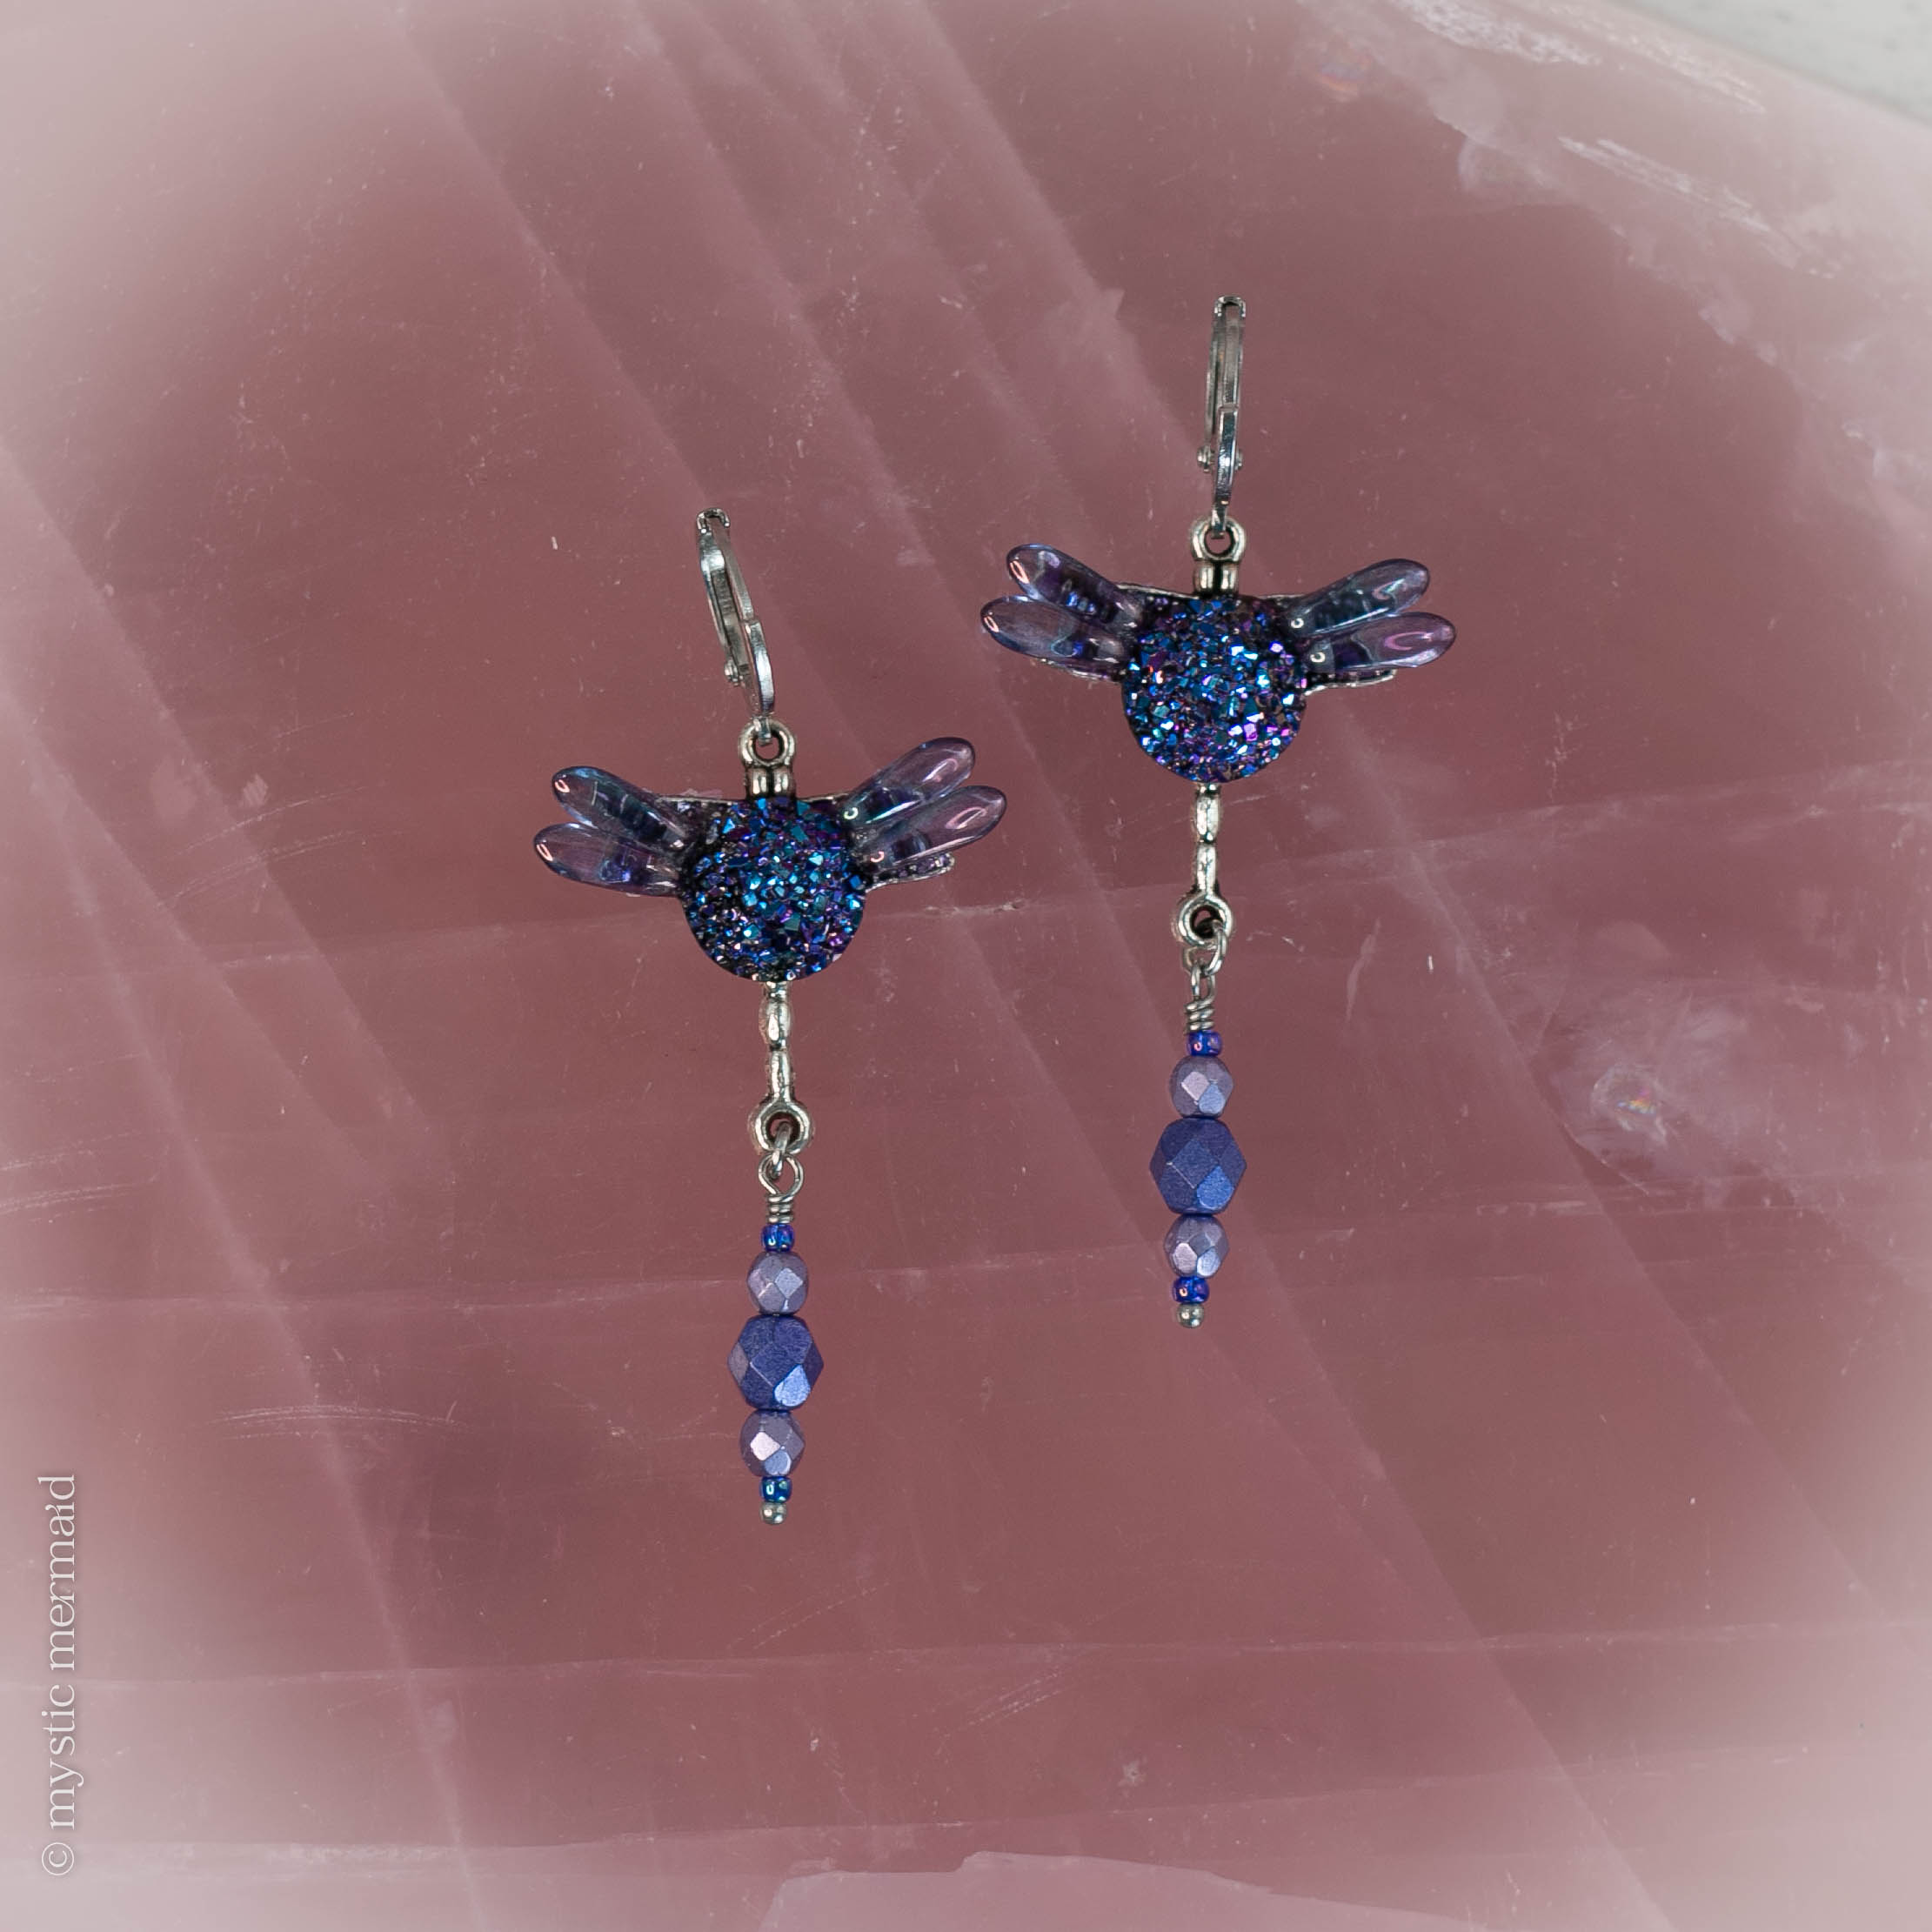 Dragonfly Czech Crystal 925 Sterling SIlver Sleeper Leverback Earrings with Faux Druzy feature